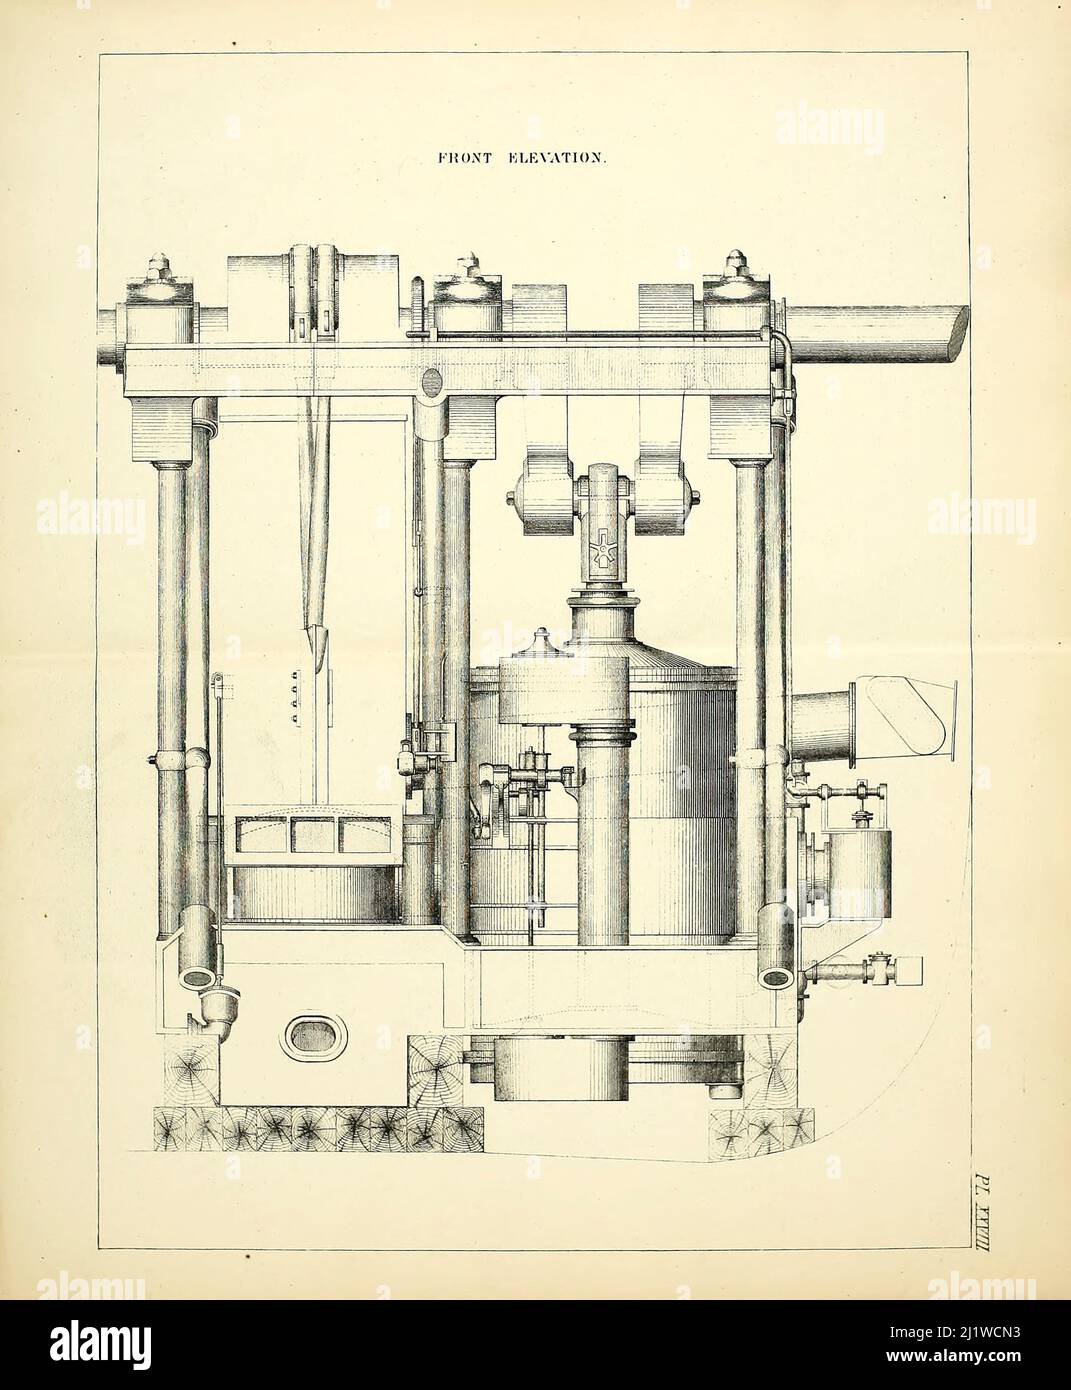 Steam Engine Front Elevation from Appleton's dictionary of machines, mechanics, engine-work, and engineering : illustrated with four thousand engravings on wood ; in two volumes by D. Appleton and Company Published New York : D. Appleton and Co 1873 Stock Photo